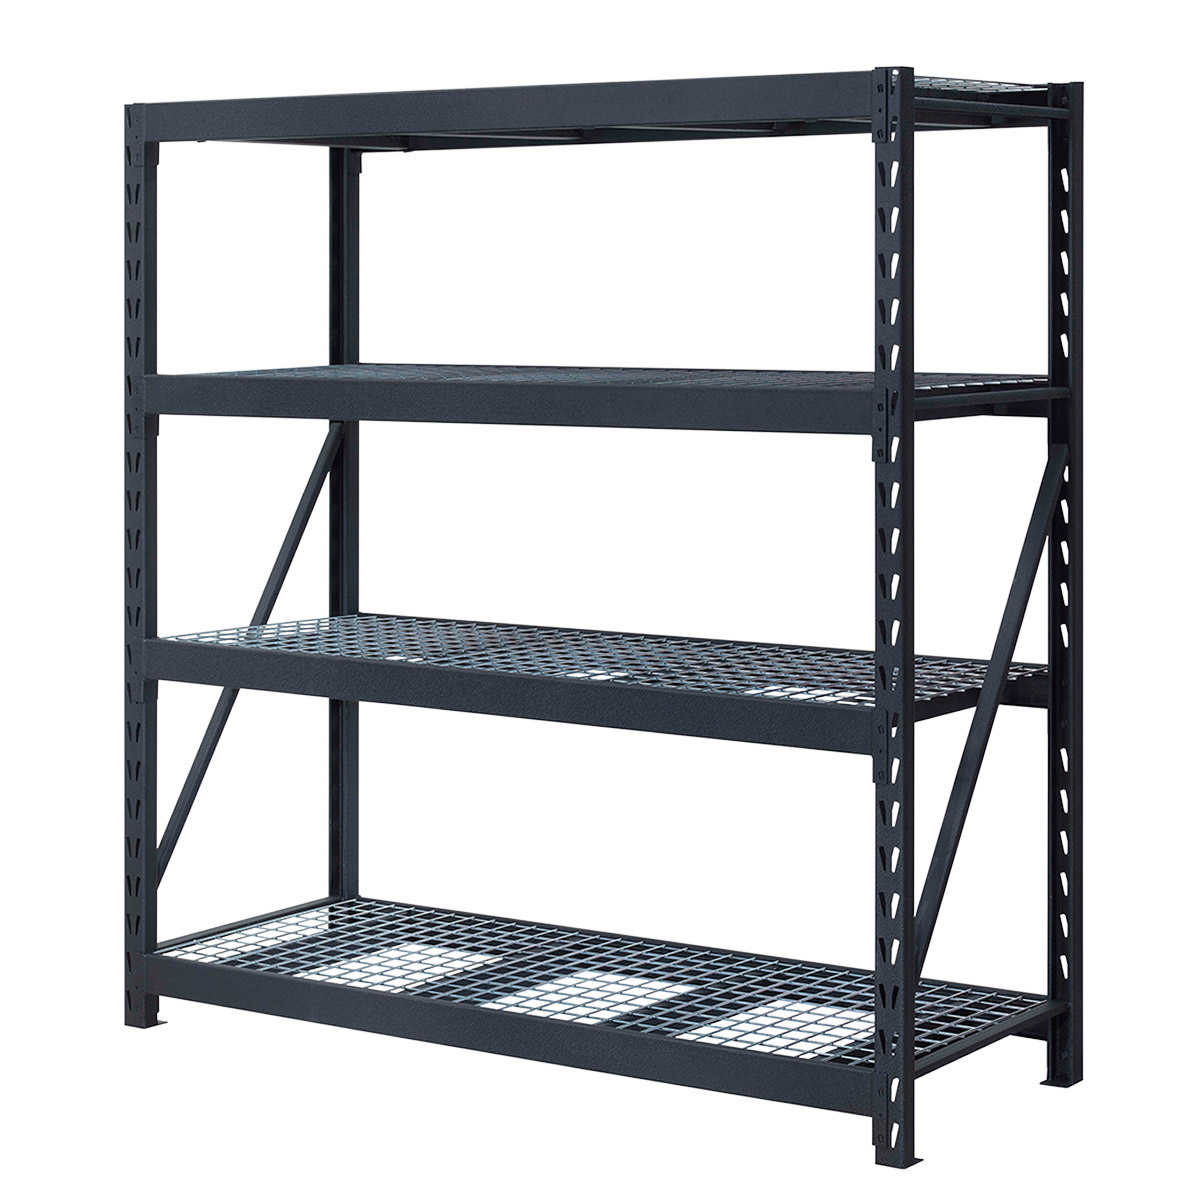 7 Shelf Industrial Style Shoe Rack Display Rack Bookcase With